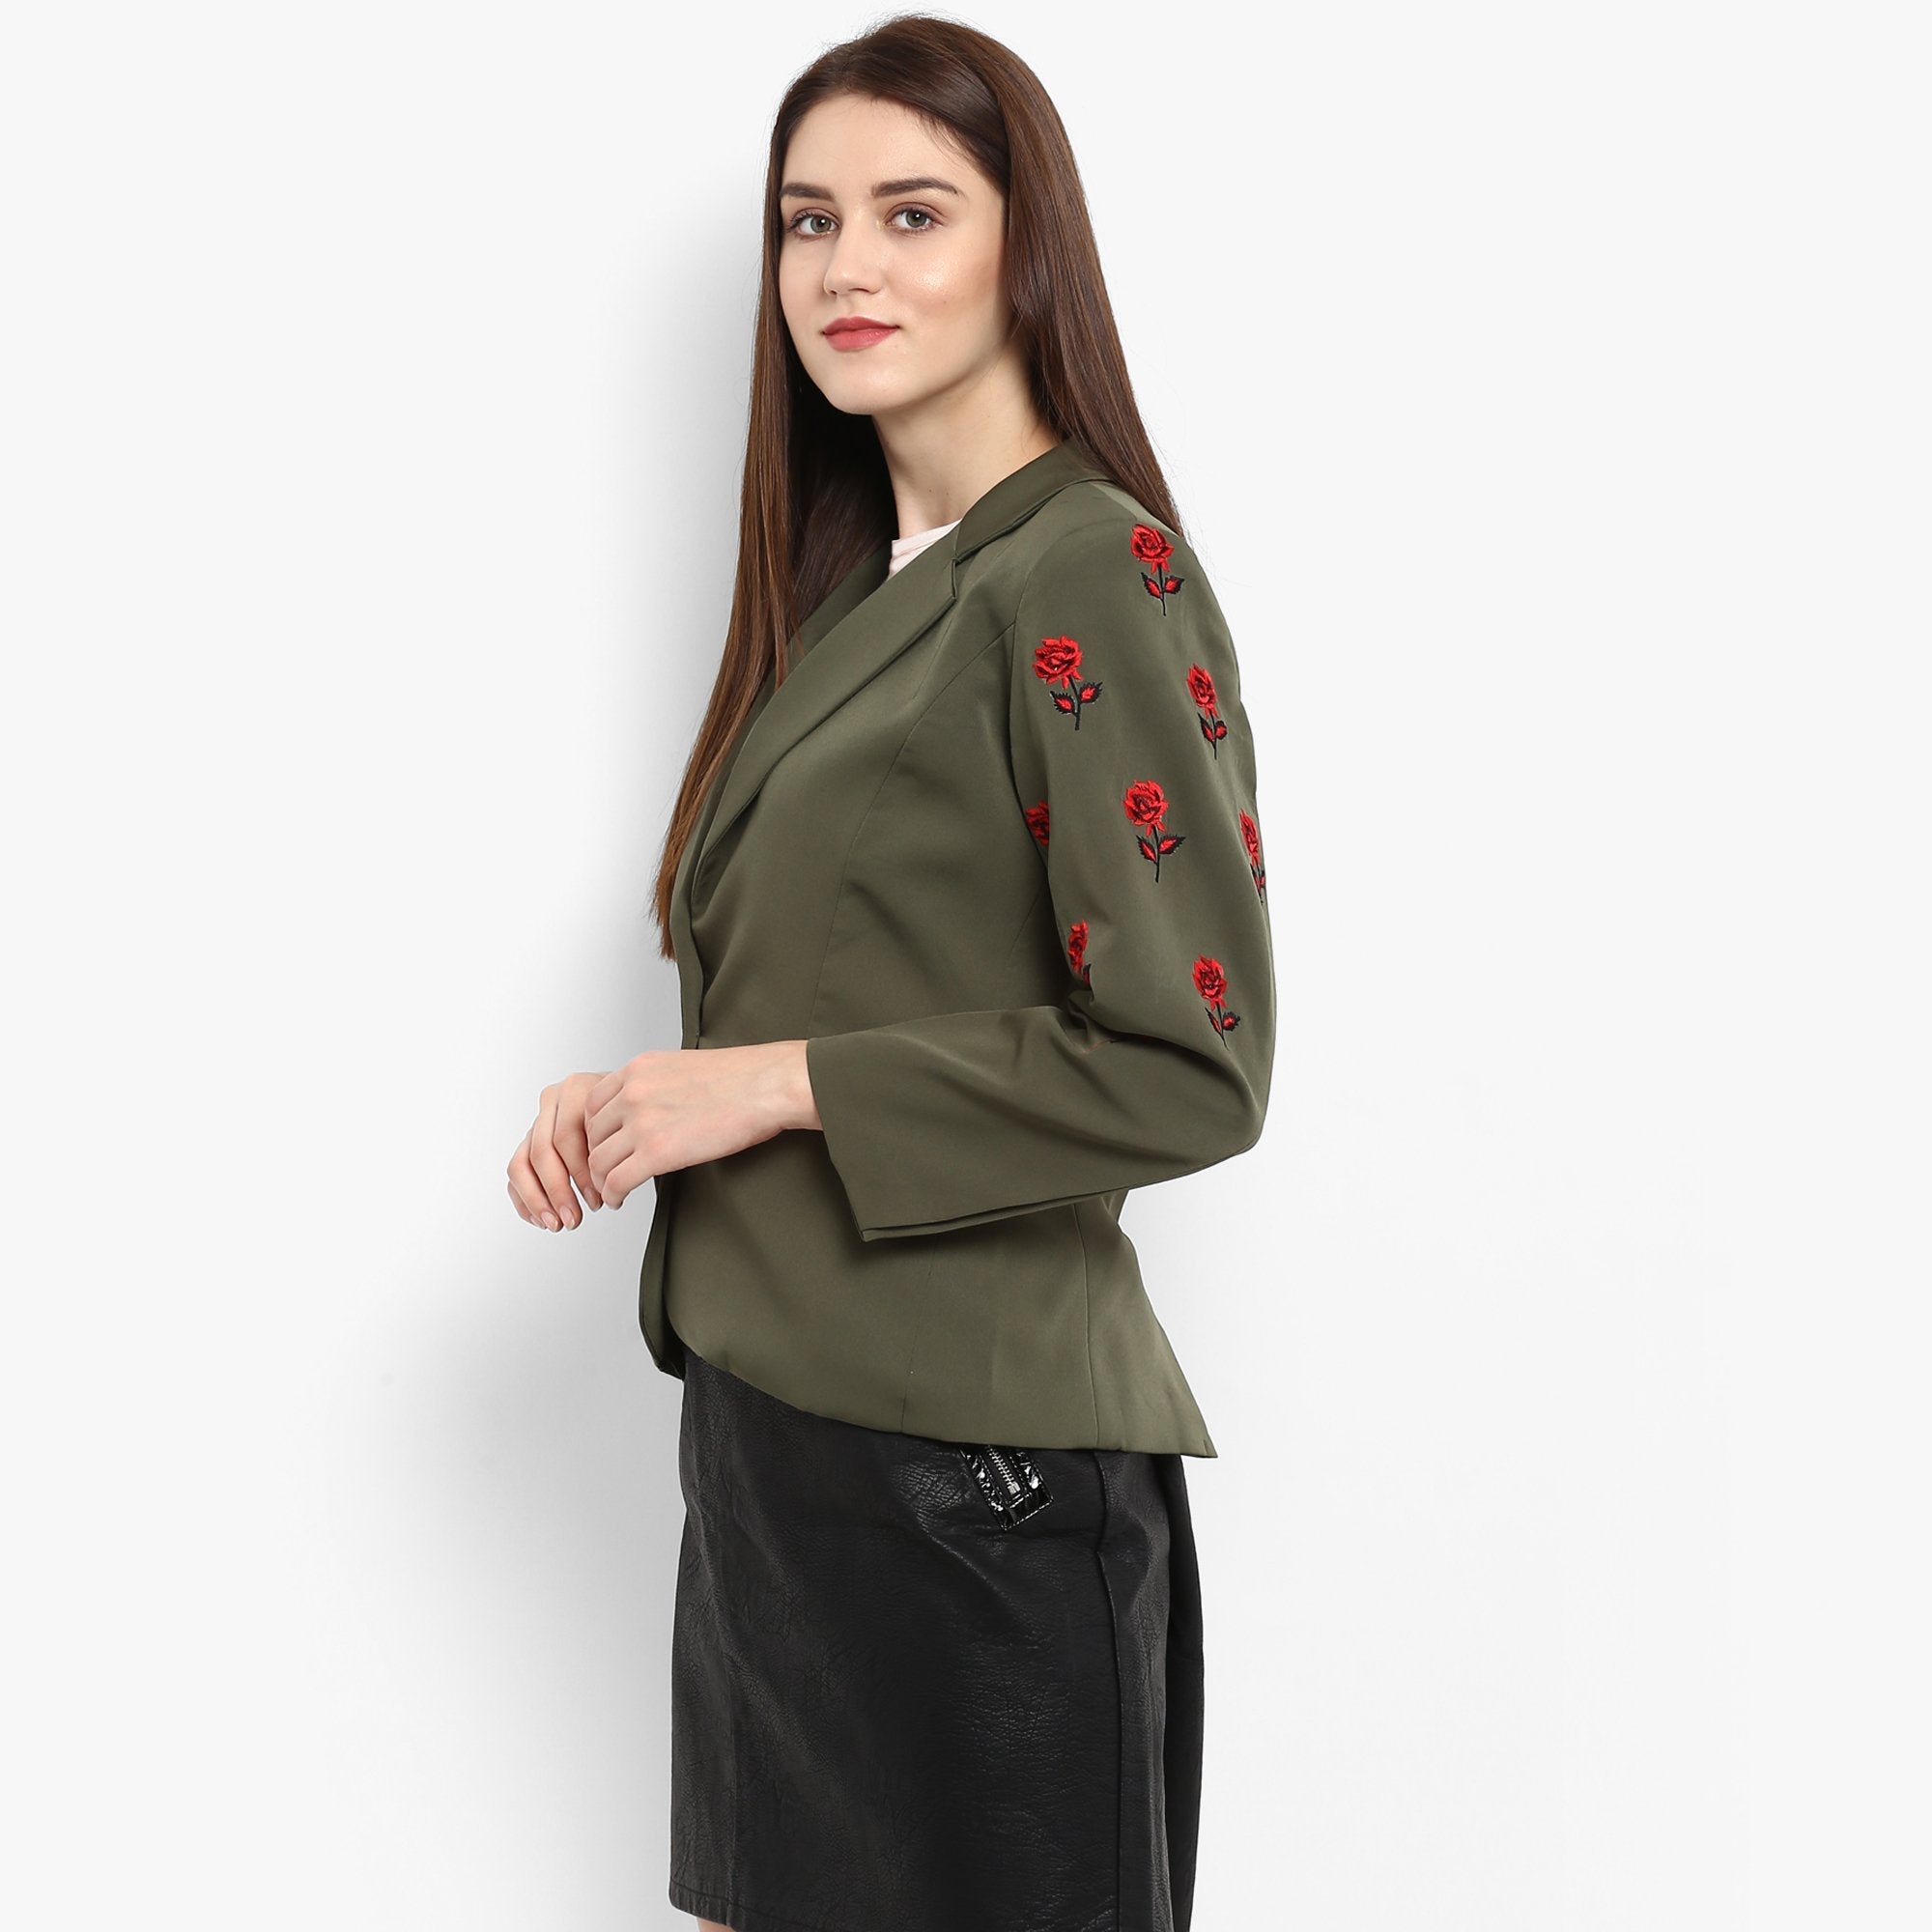 Women's Pastel Solid Collared Blazer With Embroidery - Pannkh